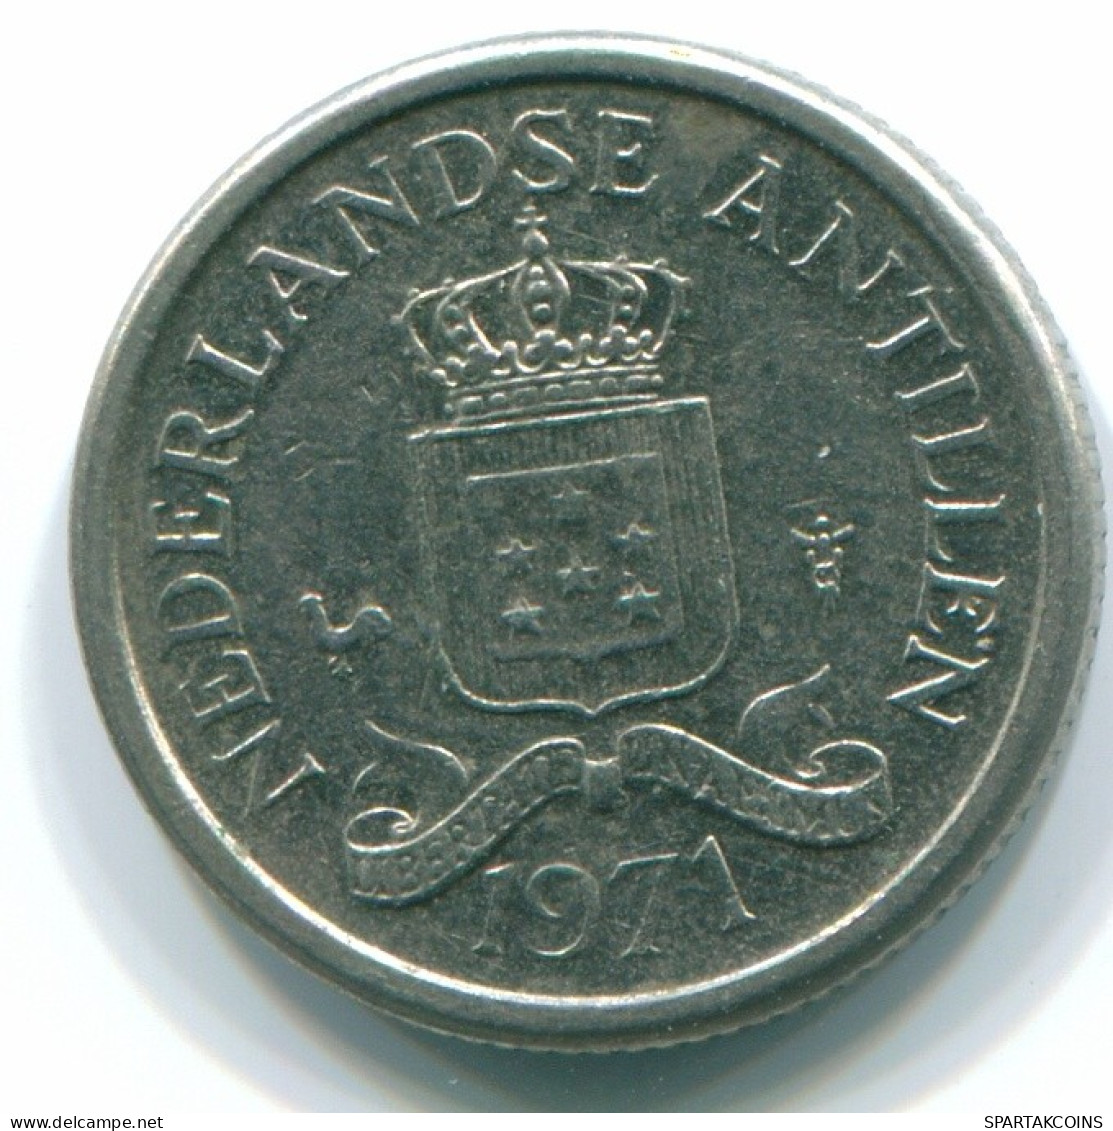 10 CENTS 1971 NETHERLANDS ANTILLES Nickel Colonial Coin #S13488.U.A - Netherlands Antilles